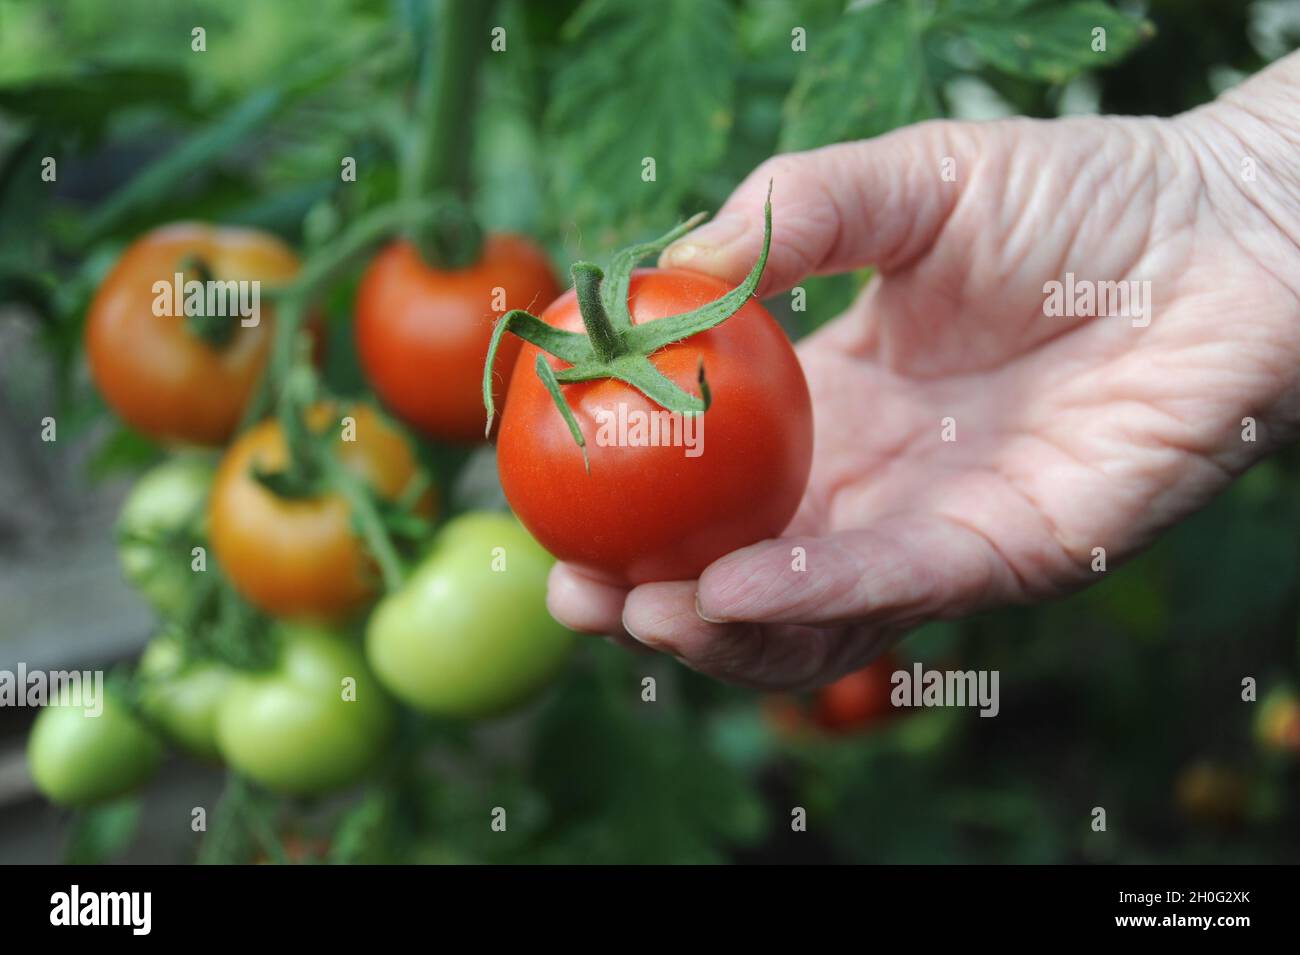 A RIPE TOMATO IN A WOMANS HAND RE GARDENING GROWING YOUR OWN VEGETABLES FRUIT VEG ETC UK Stock Photo